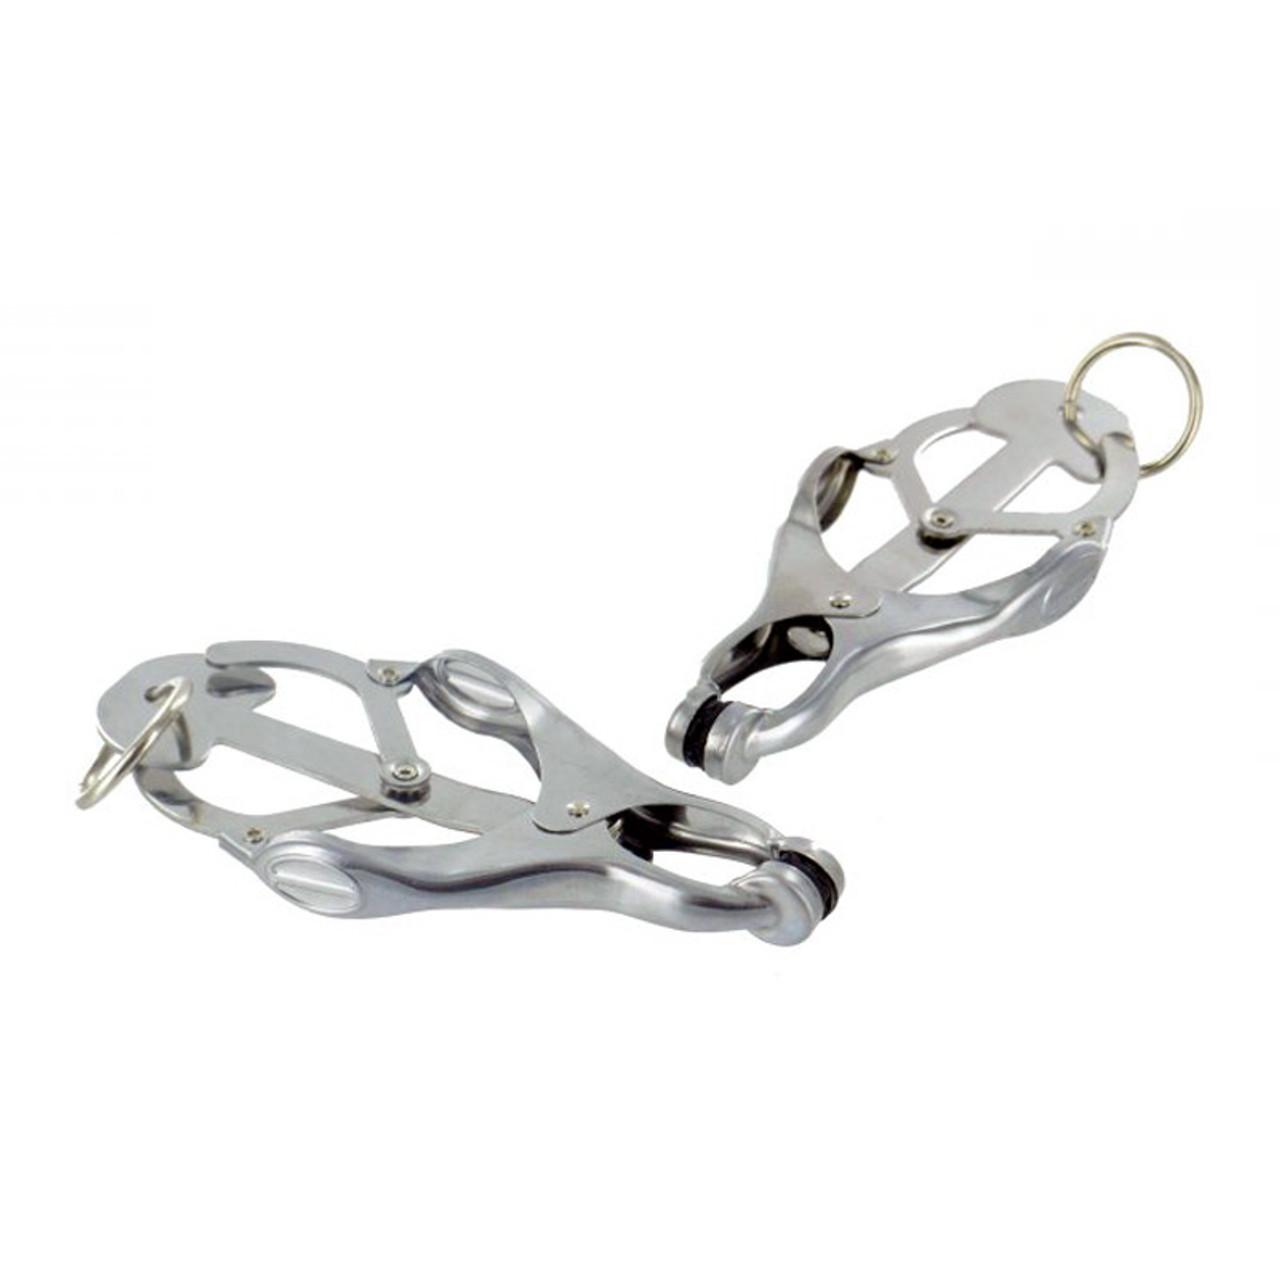 Buy the Deviant Monarch Weighted Ringed Clover-style Nipple Clamps with 8 oz Weights pic